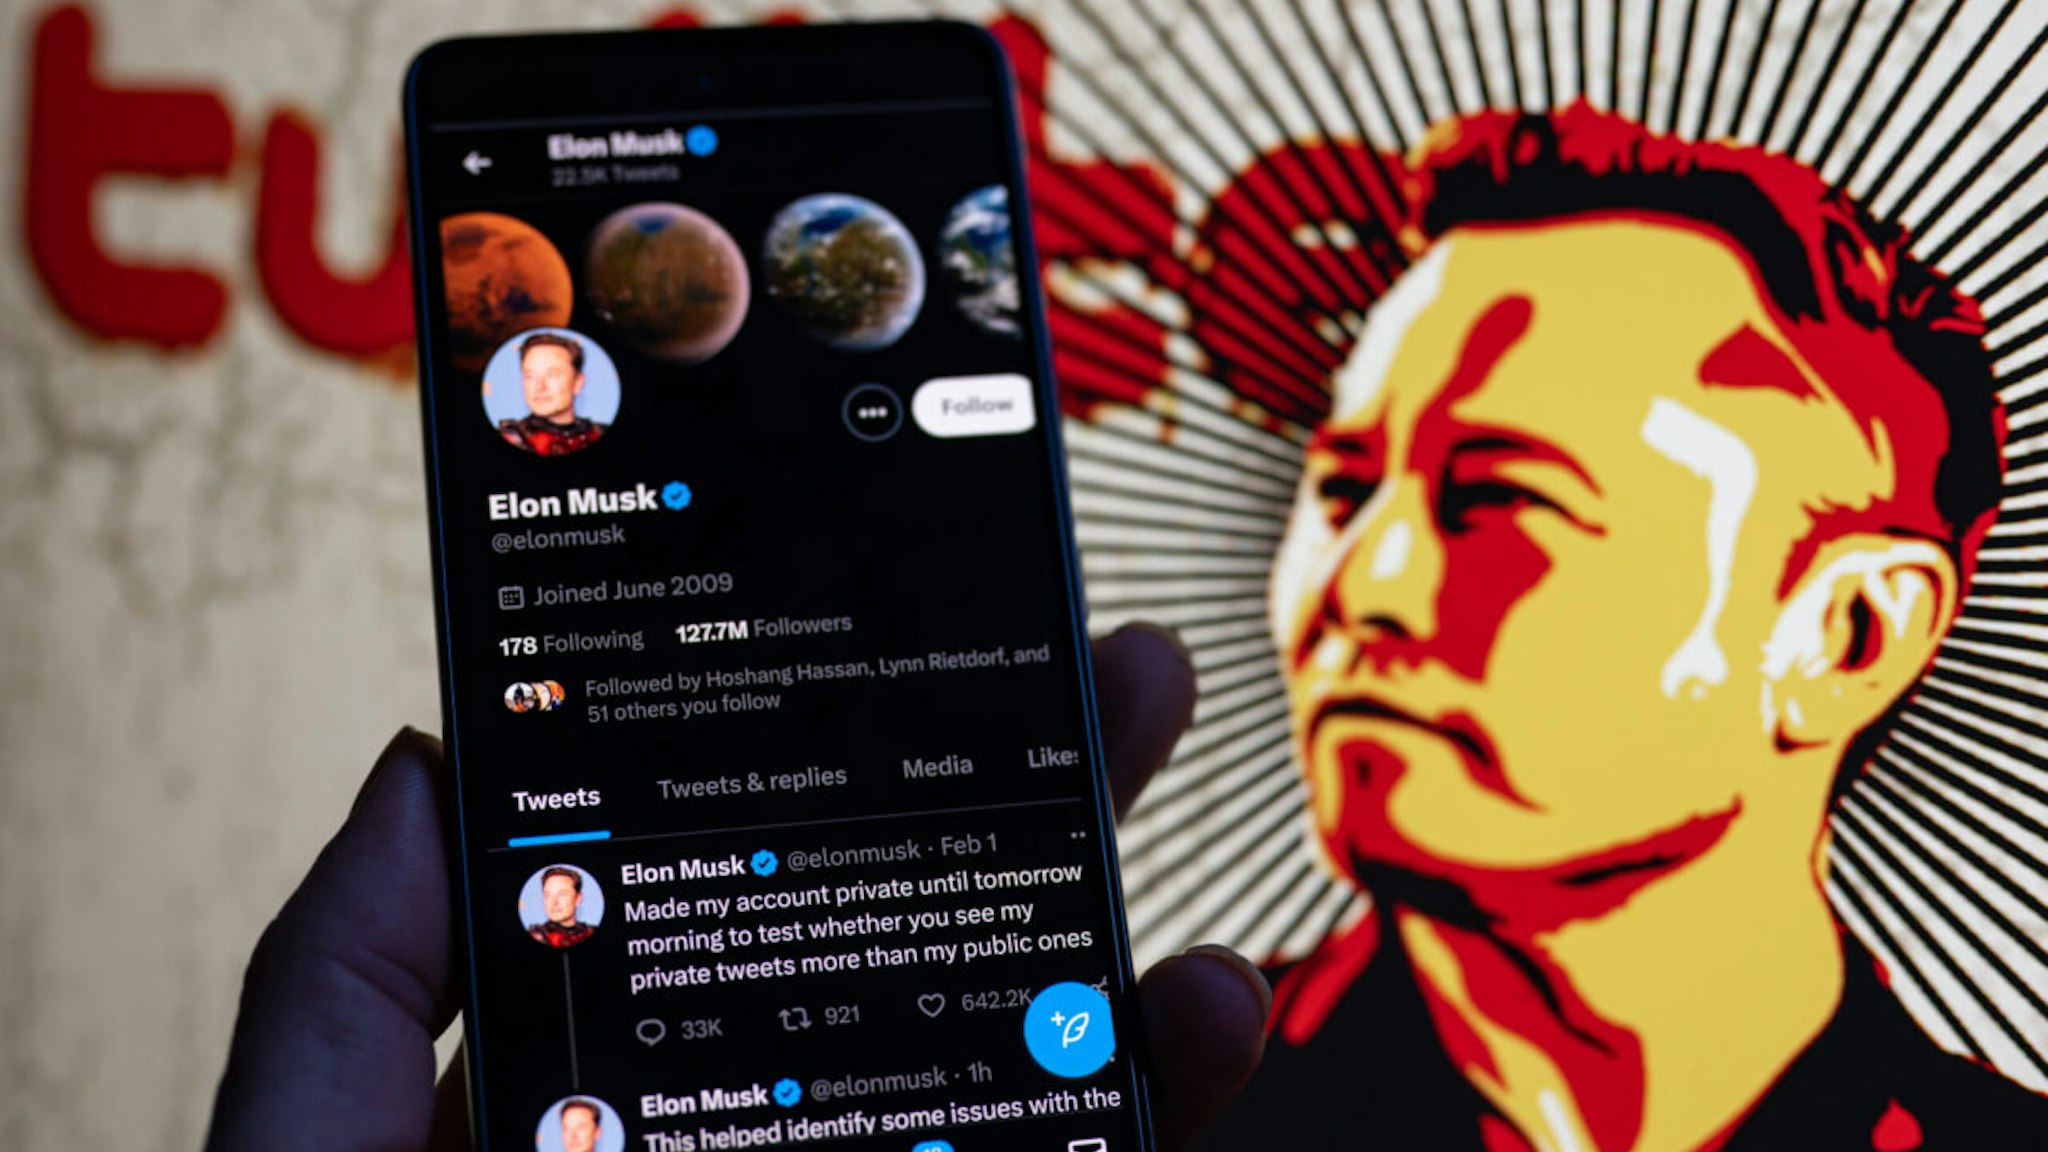 Elon Musk Twitter account private page seen on Mobile with Elon Musk in the background on screen.